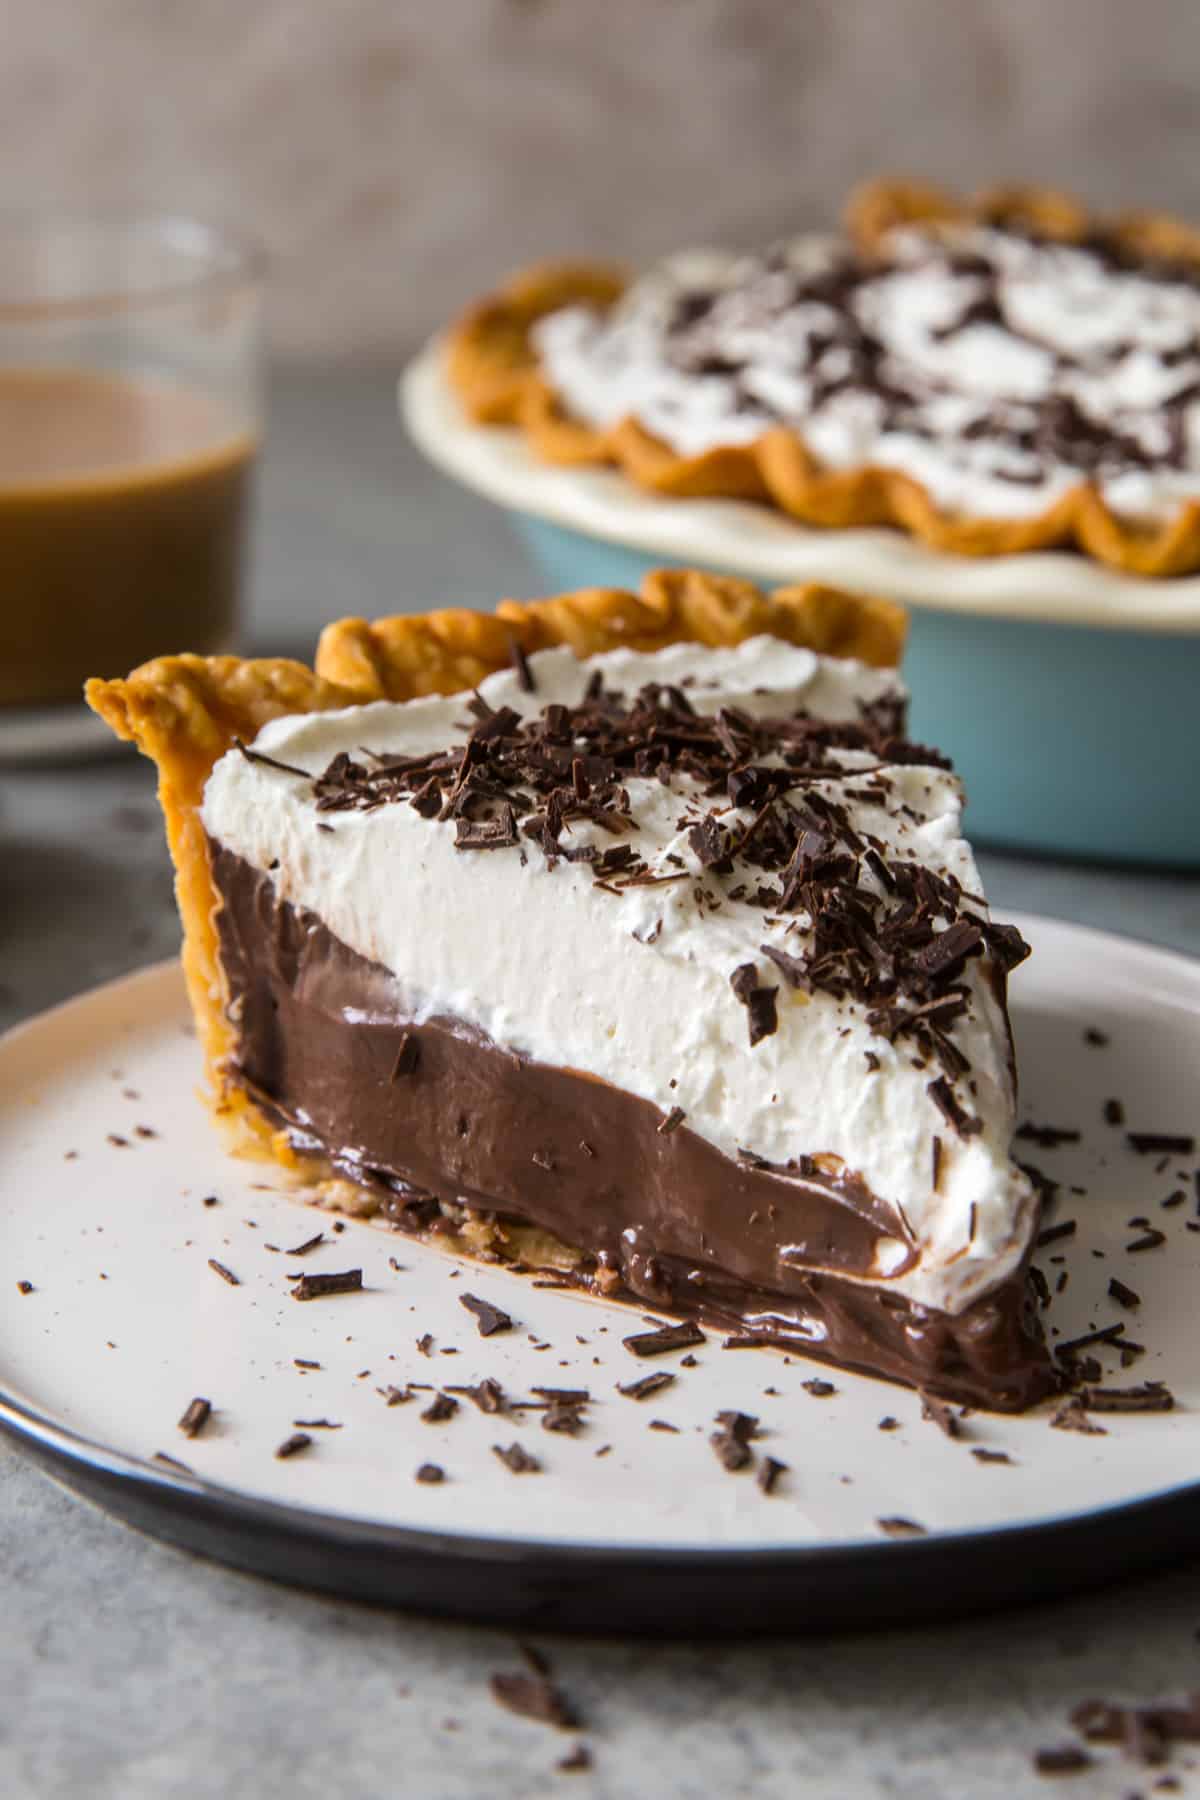 A slice of Chocolate Cream Pie on a white plate.